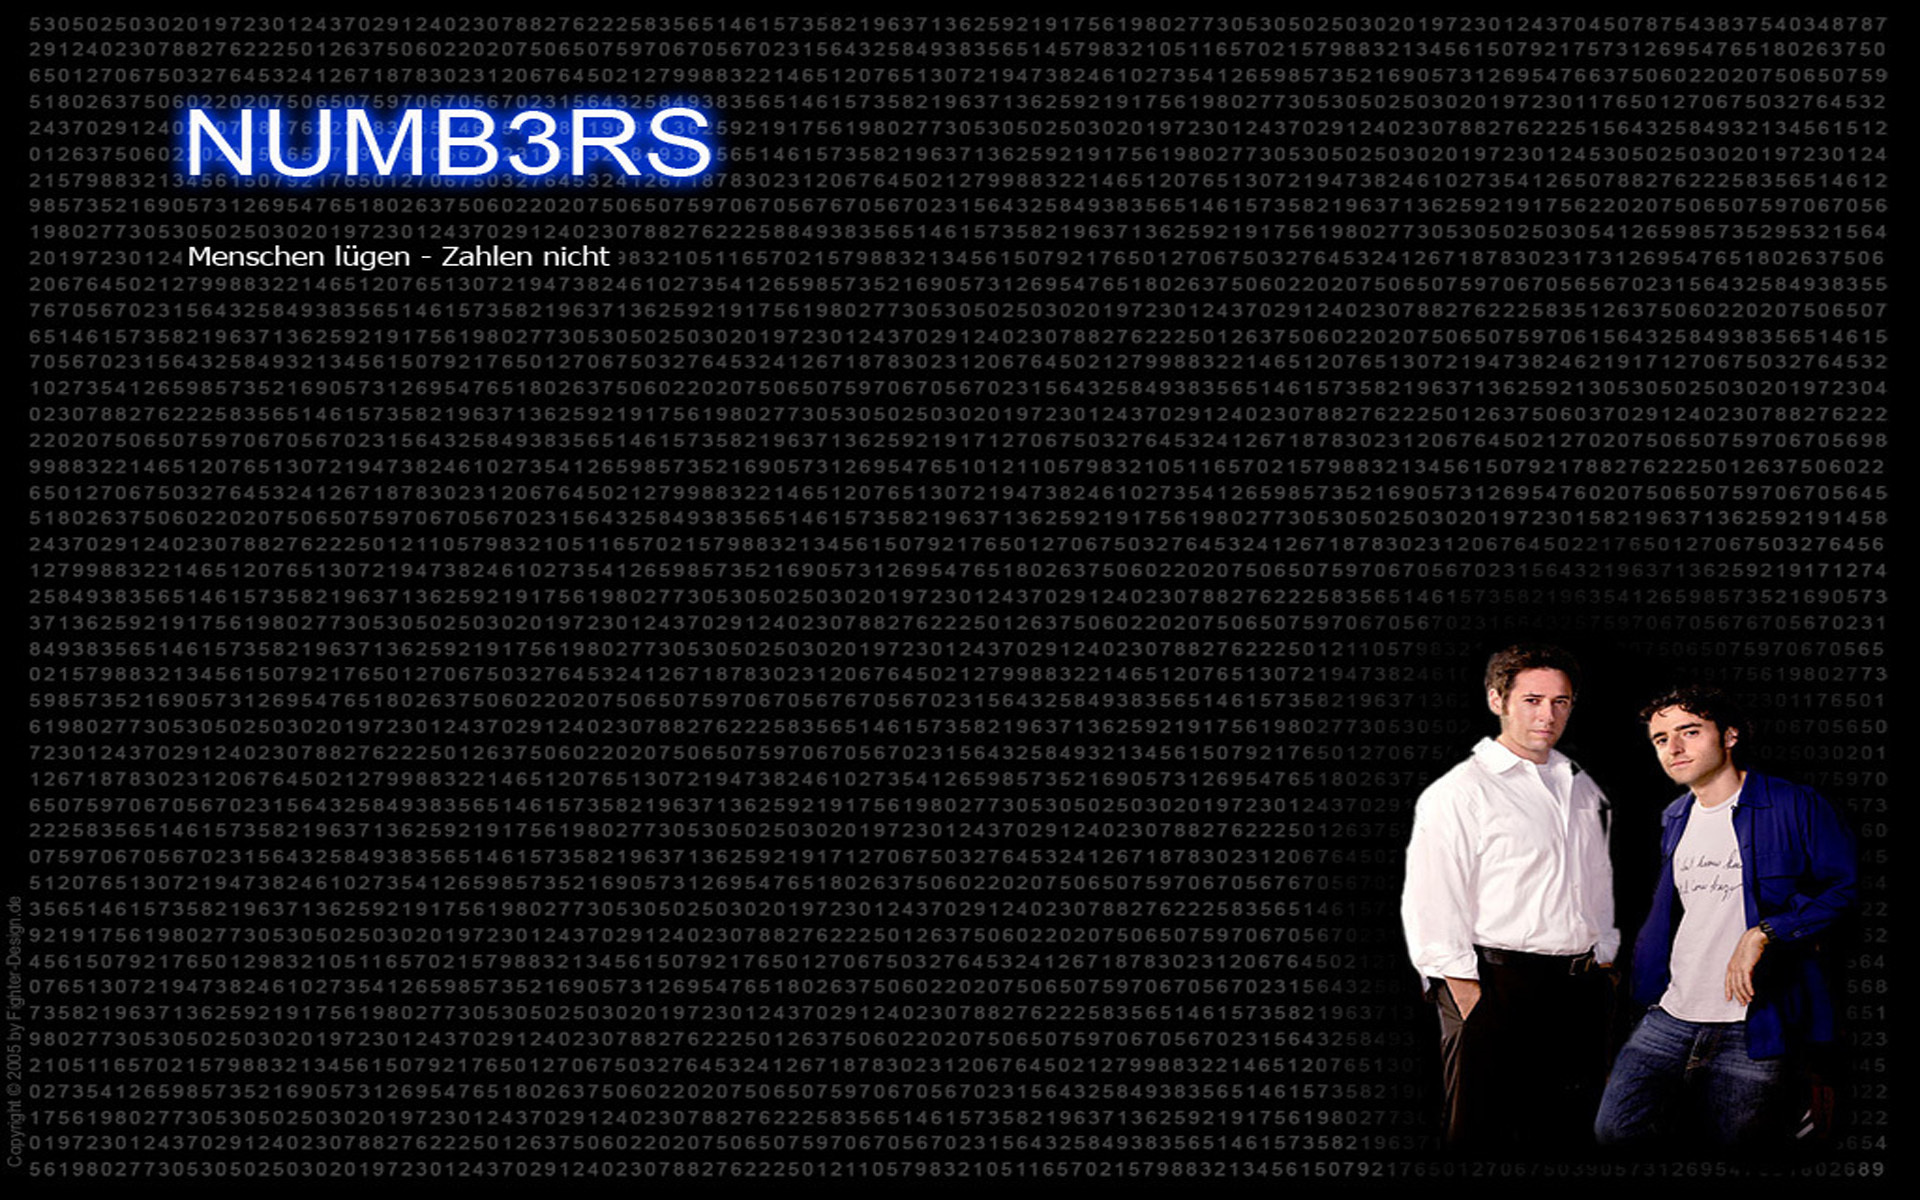 Numb3Rs Wallpapers